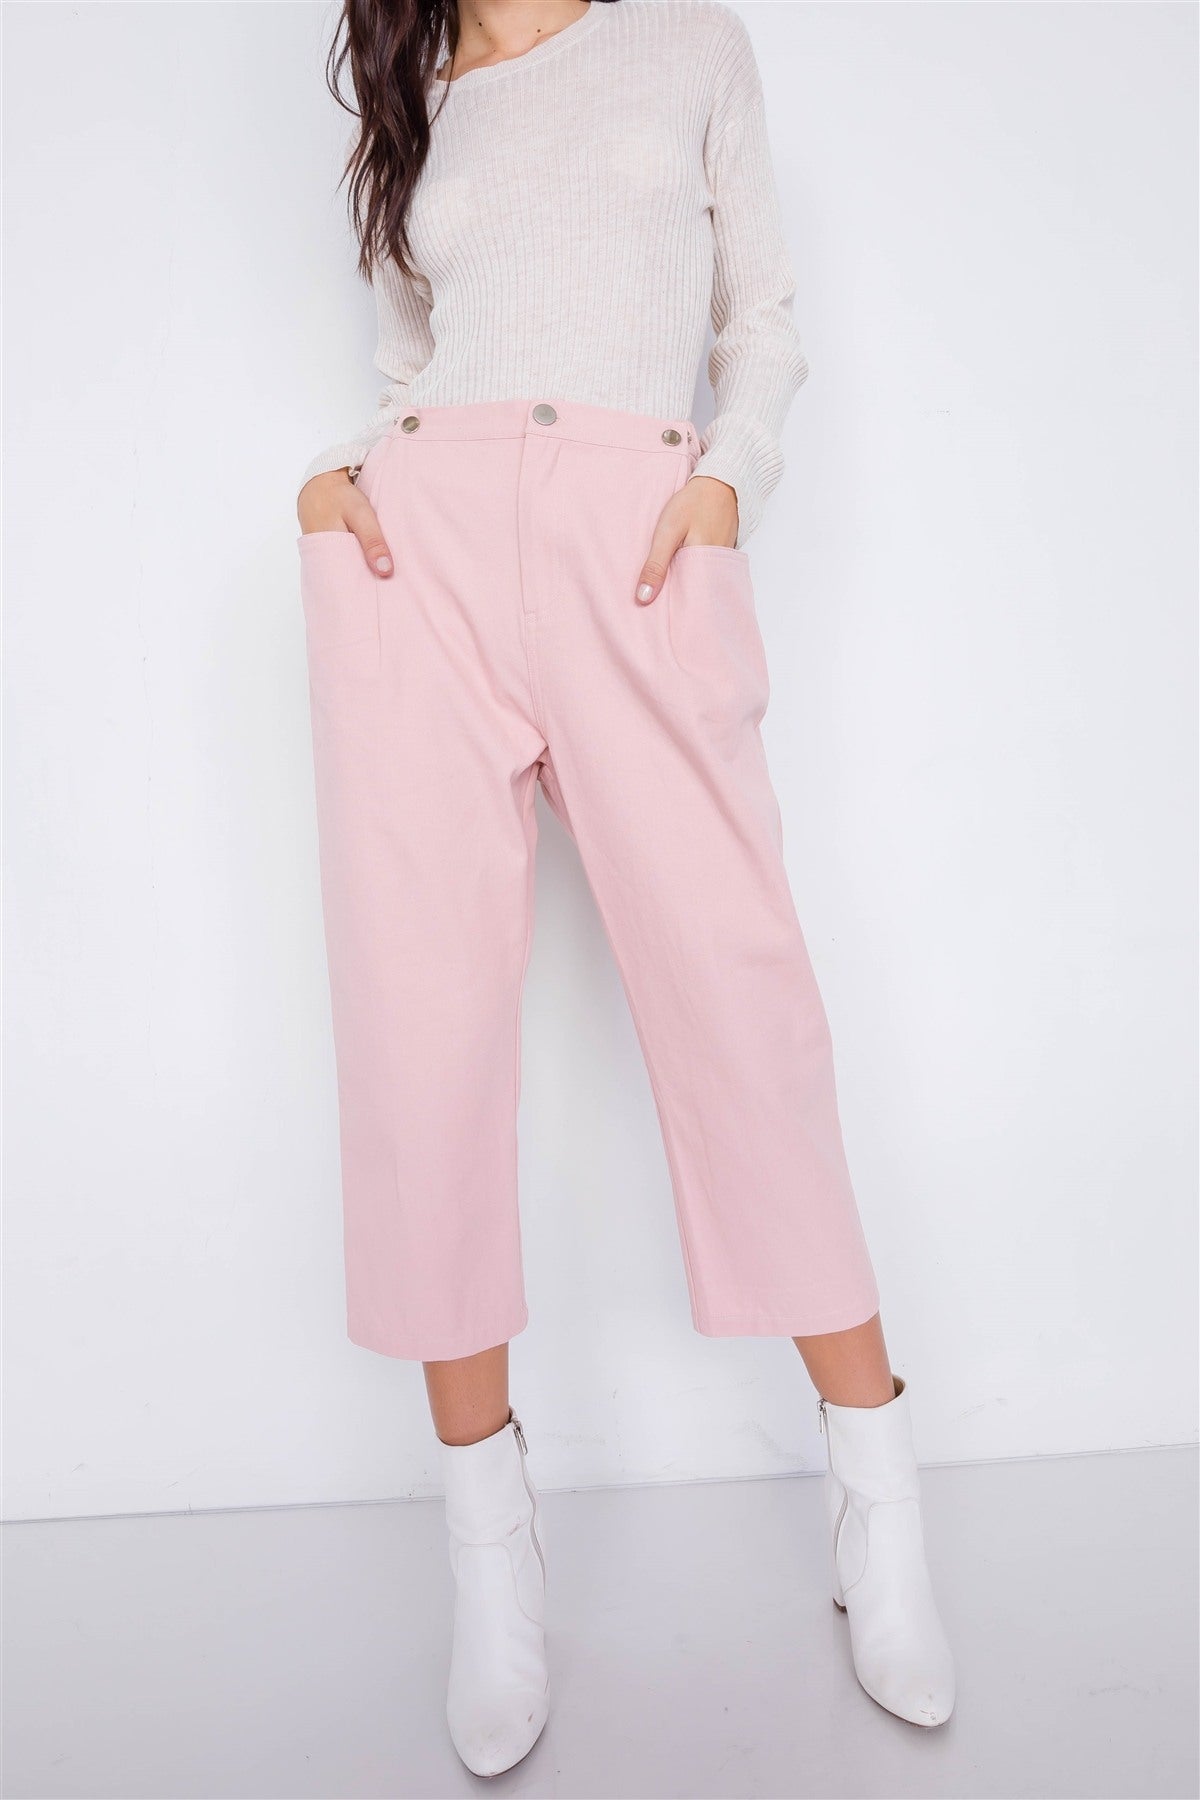 Dusty Rose - Pastel Chic Solid Ankle Wide Leg Adjustable Snap Waist Pants - 2 colors - womens pants at TFC&H Co.